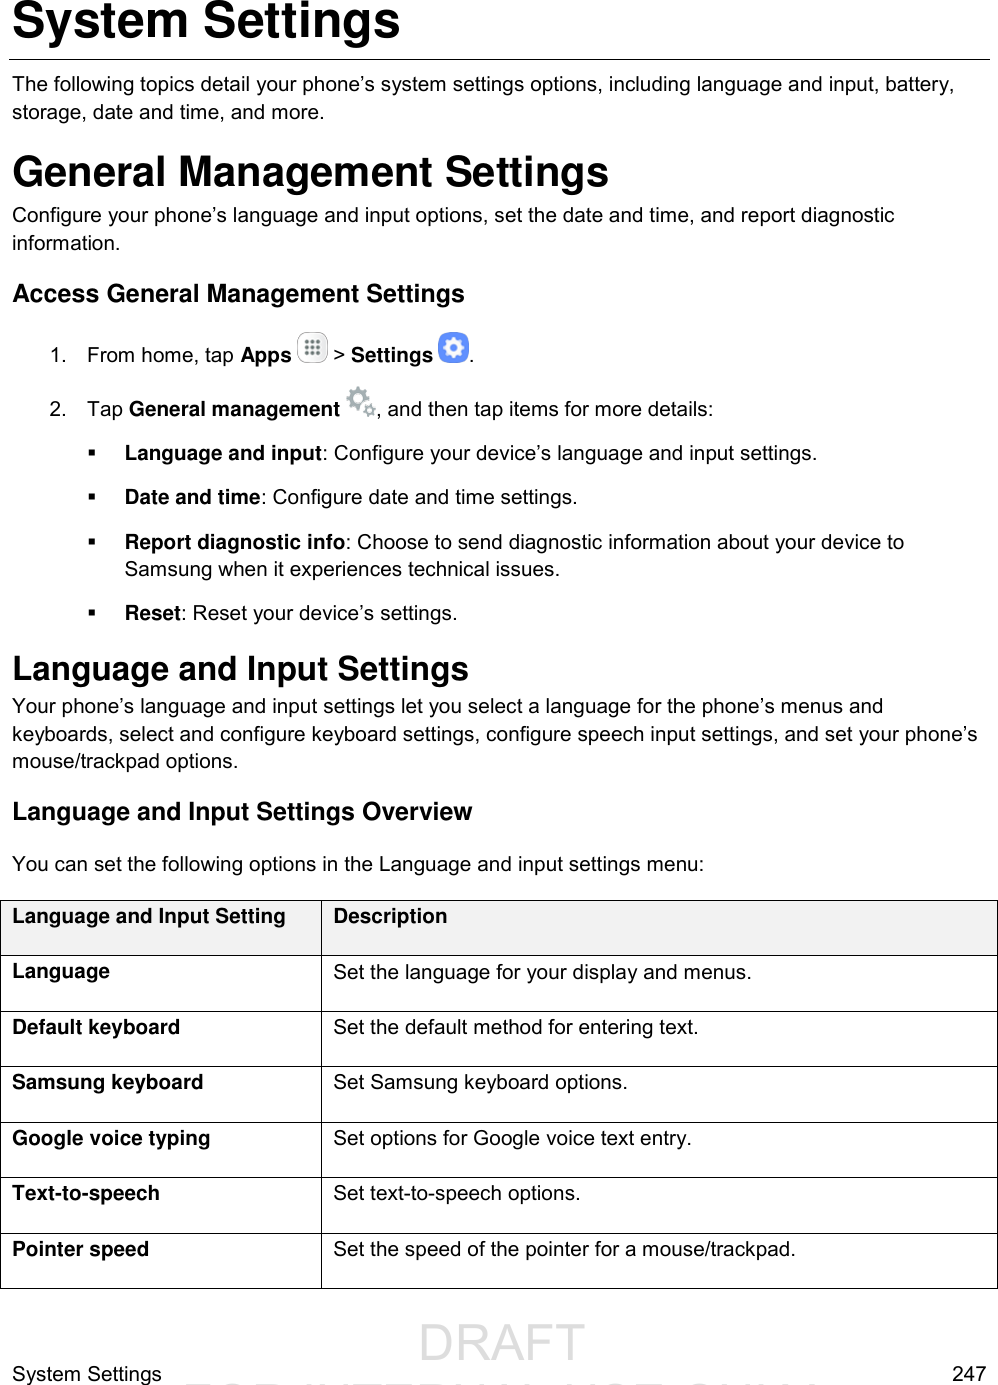                  DRAFT FOR INTERNAL USE ONLYSystem Settings  247 System Settings The following topics detail your phone’s system settings options, including language and input, battery, storage, date and time, and more. General Management Settings Configure your phone’s language and input options, set the date and time, and report diagnostic information. Access General Management Settings 1.  From home, tap Apps   &gt; Settings  . 2.  Tap General management  , and then tap items for more details:  Language and input: Configure your device’s language and input settings.  Date and time: Configure date and time settings.  Report diagnostic info: Choose to send diagnostic information about your device to Samsung when it experiences technical issues.  Reset: Reset your device’s settings. Language and Input Settings Your phone’s language and input settings let you select a language for the phone’s menus and keyboards, select and configure keyboard settings, configure speech input settings, and set your phone’s mouse/trackpad options. Language and Input Settings Overview You can set the following options in the Language and input settings menu:  Language and Input Setting Description Language Set the language for your display and menus. Default keyboard Set the default method for entering text. Samsung keyboard Set Samsung keyboard options. Google voice typing Set options for Google voice text entry. Text-to-speech Set text-to-speech options. Pointer speed Set the speed of the pointer for a mouse/trackpad. 